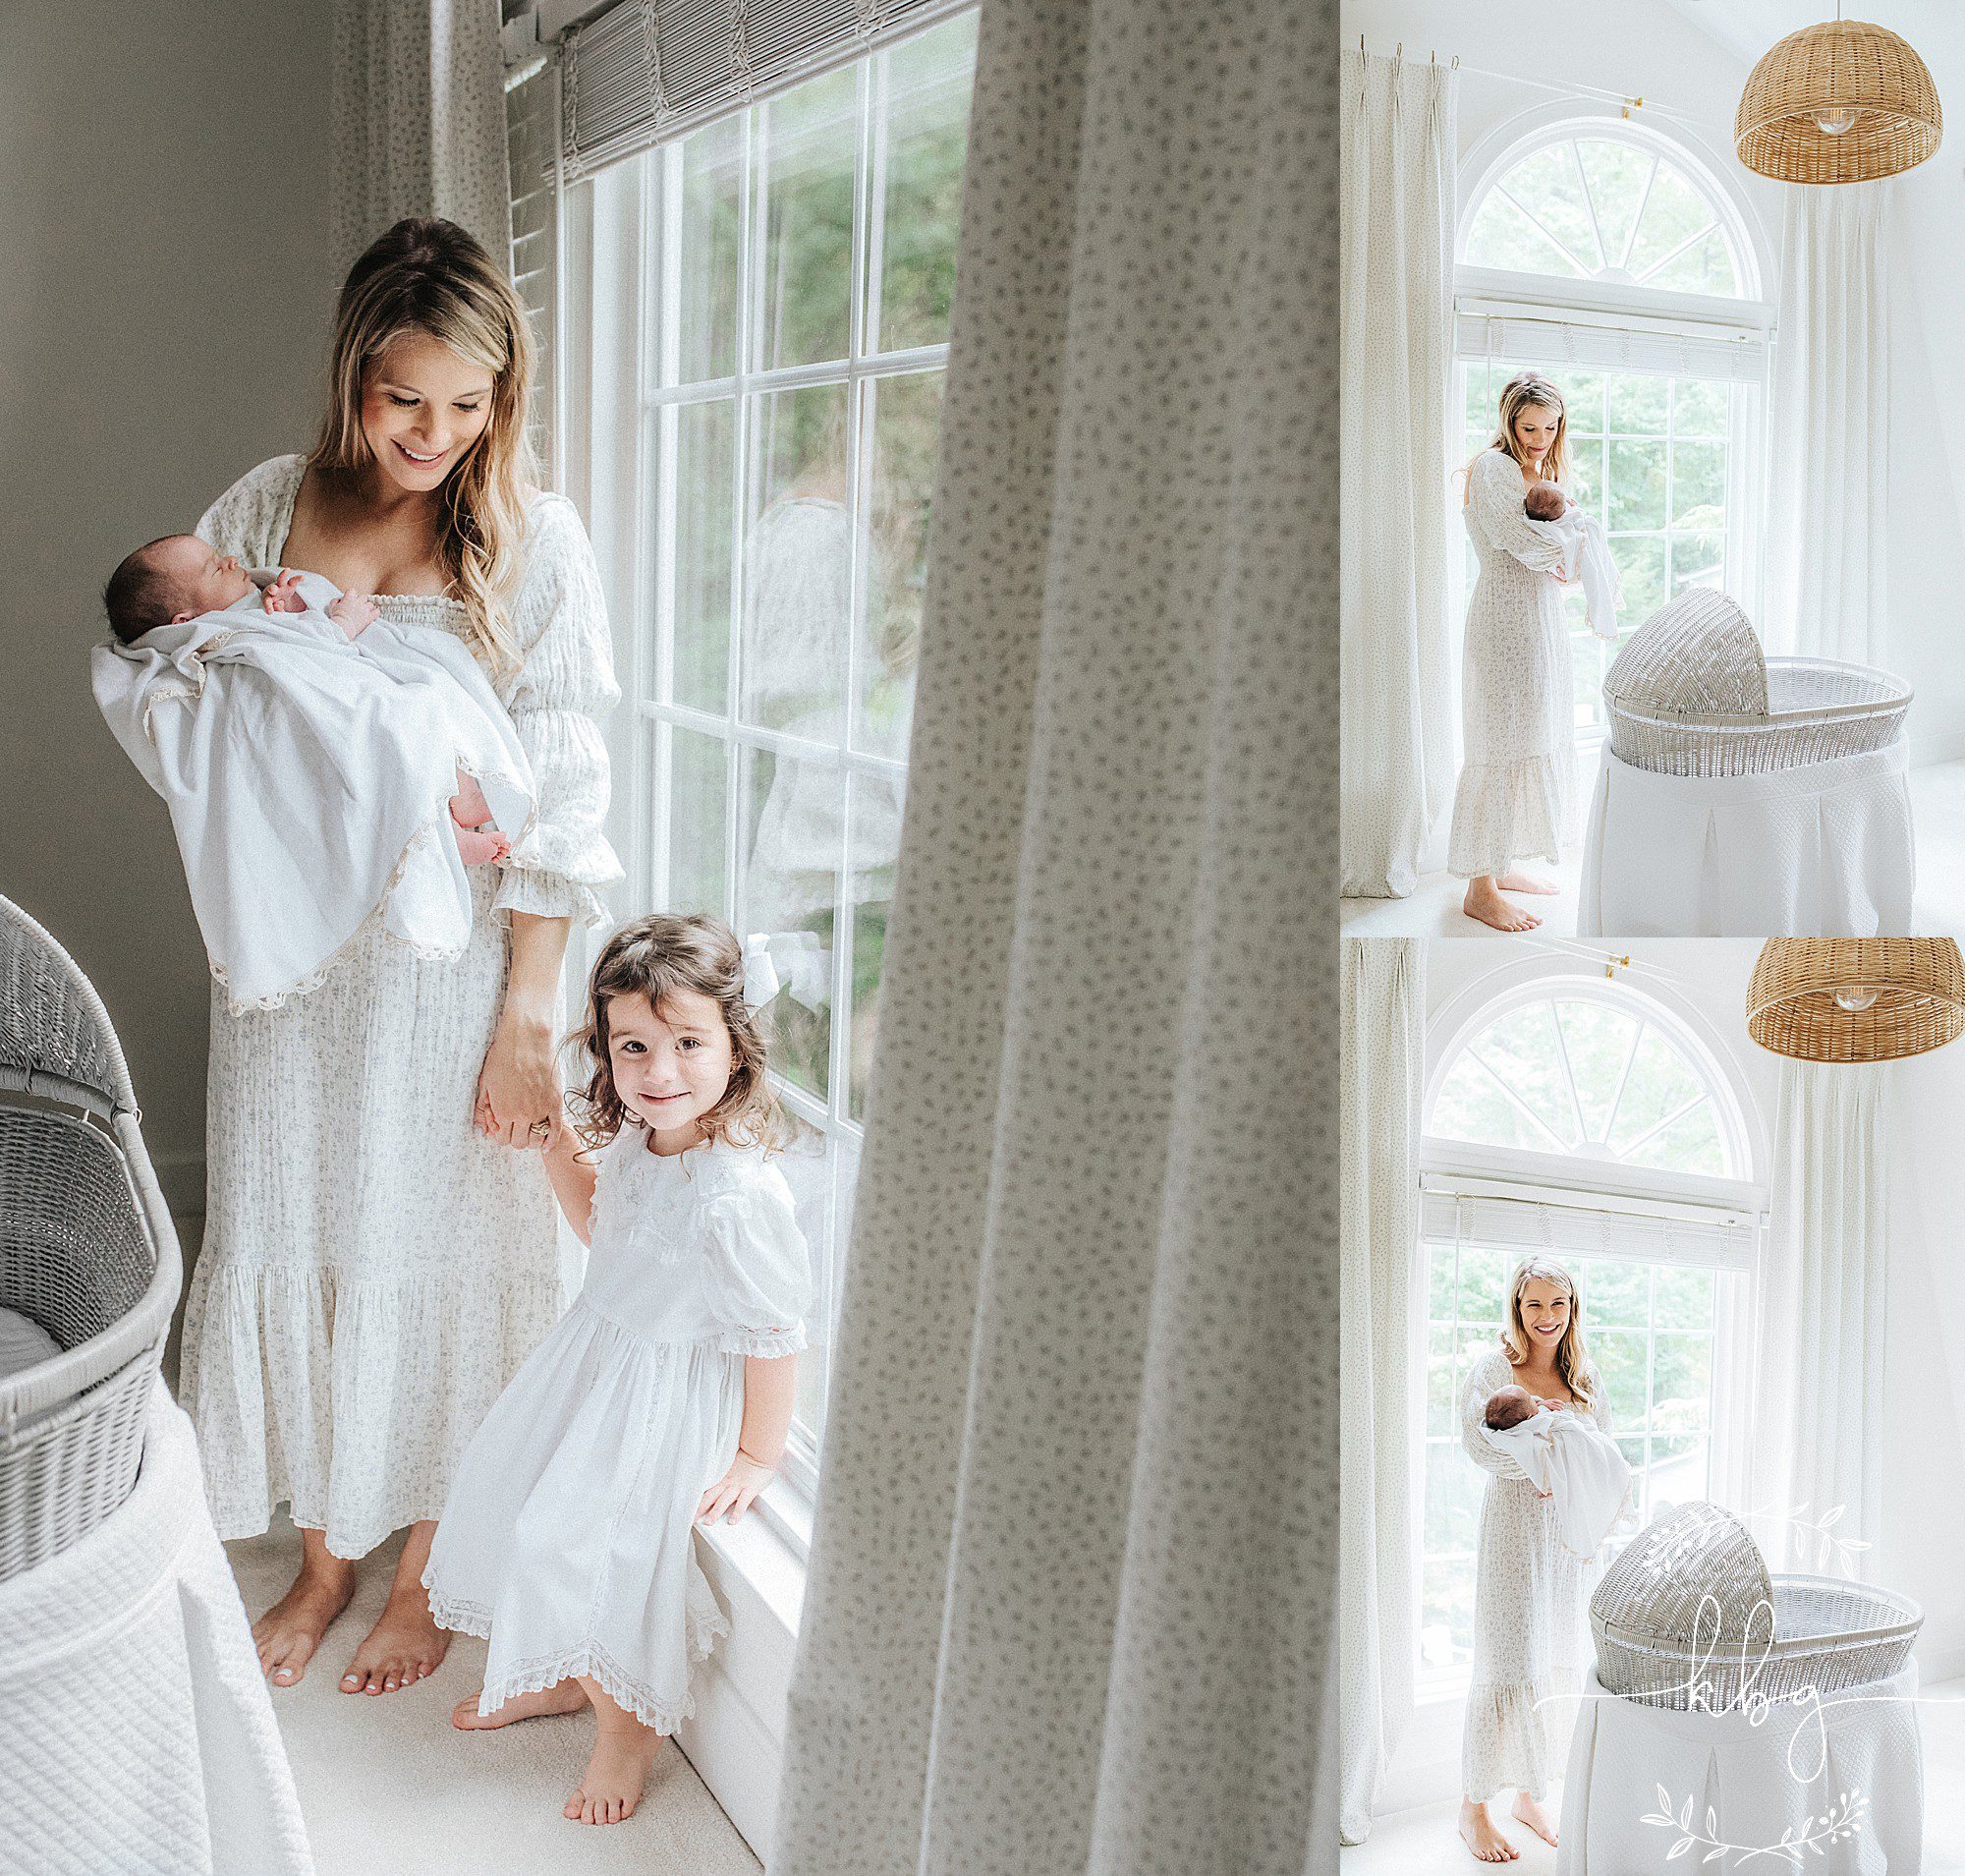 mom with new baby in their bedroom - marietta family photographer